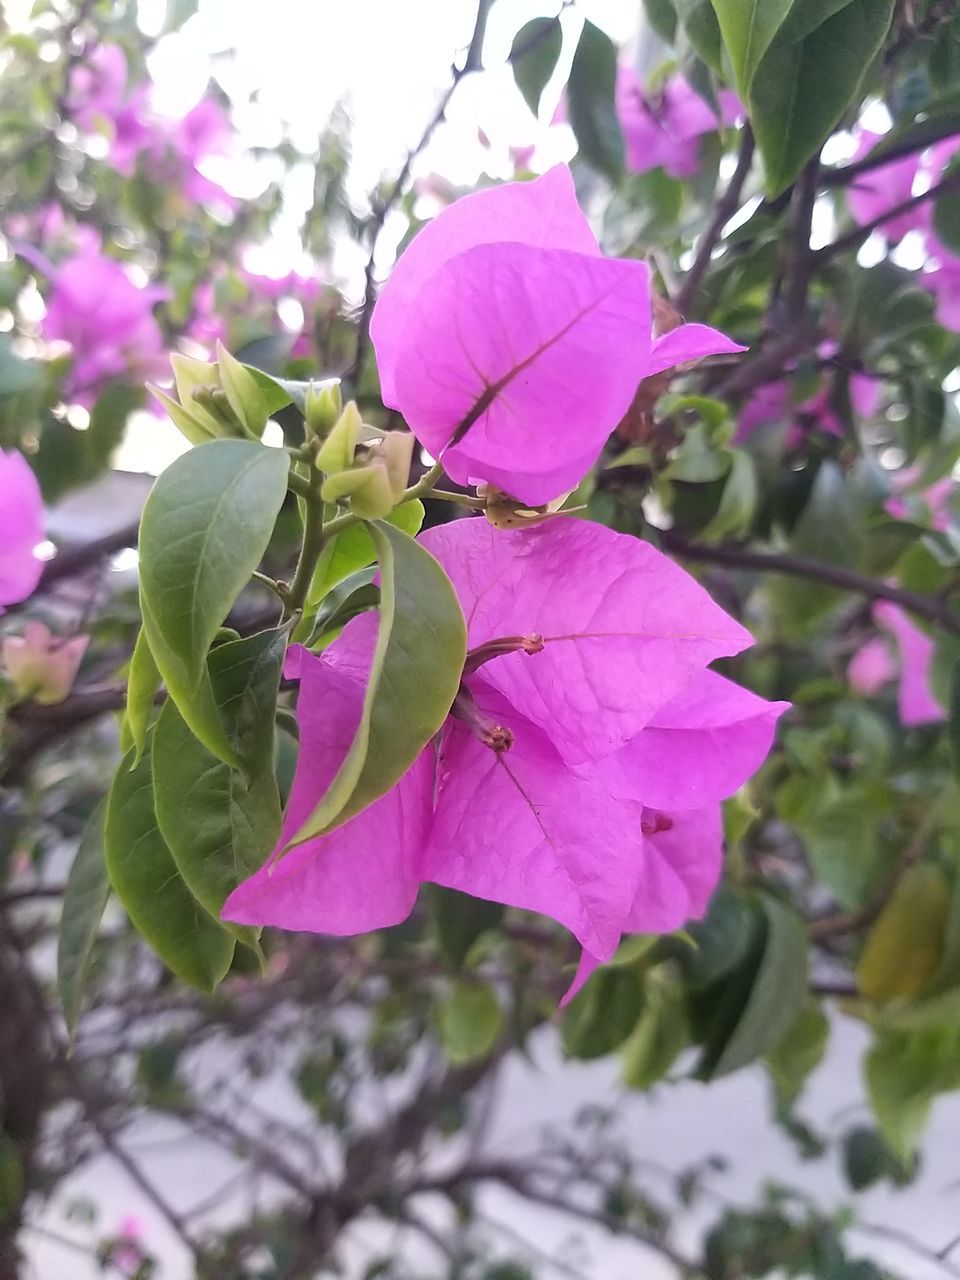 plant, flower, flowering plant, pink, beauty in nature, growth, freshness, petal, fragility, plant part, leaf, nature, close-up, blossom, flower head, tree, inflorescence, no people, springtime, branch, purple, focus on foreground, day, bougainvillea, outdoors, lilac, botany, shrub, magenta